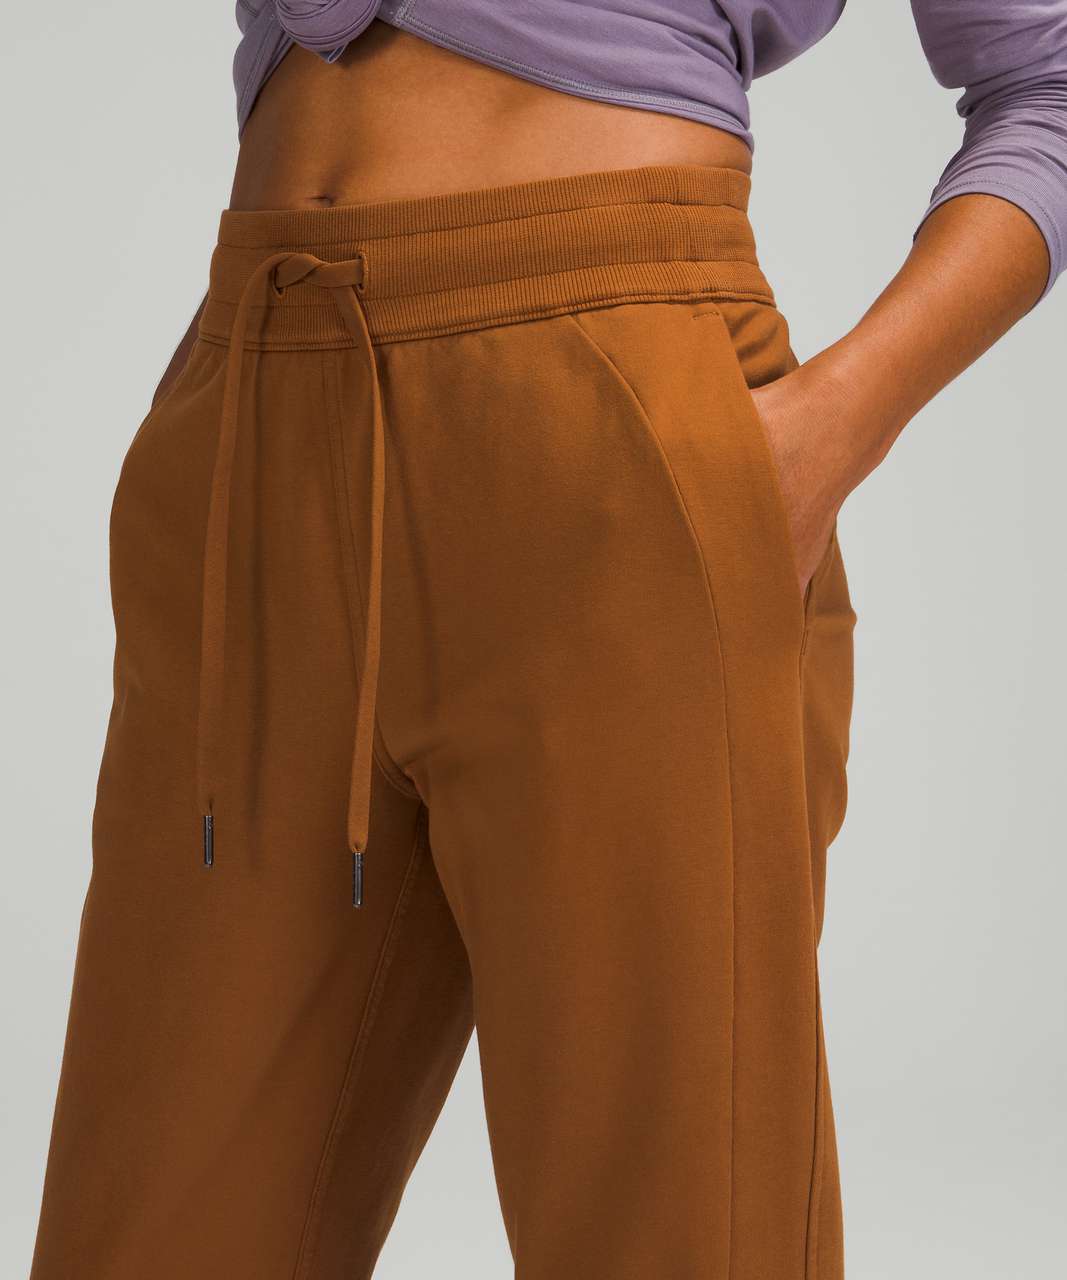 Lululemon Scuba High-Rise French Terry Jogger - Copper Brown